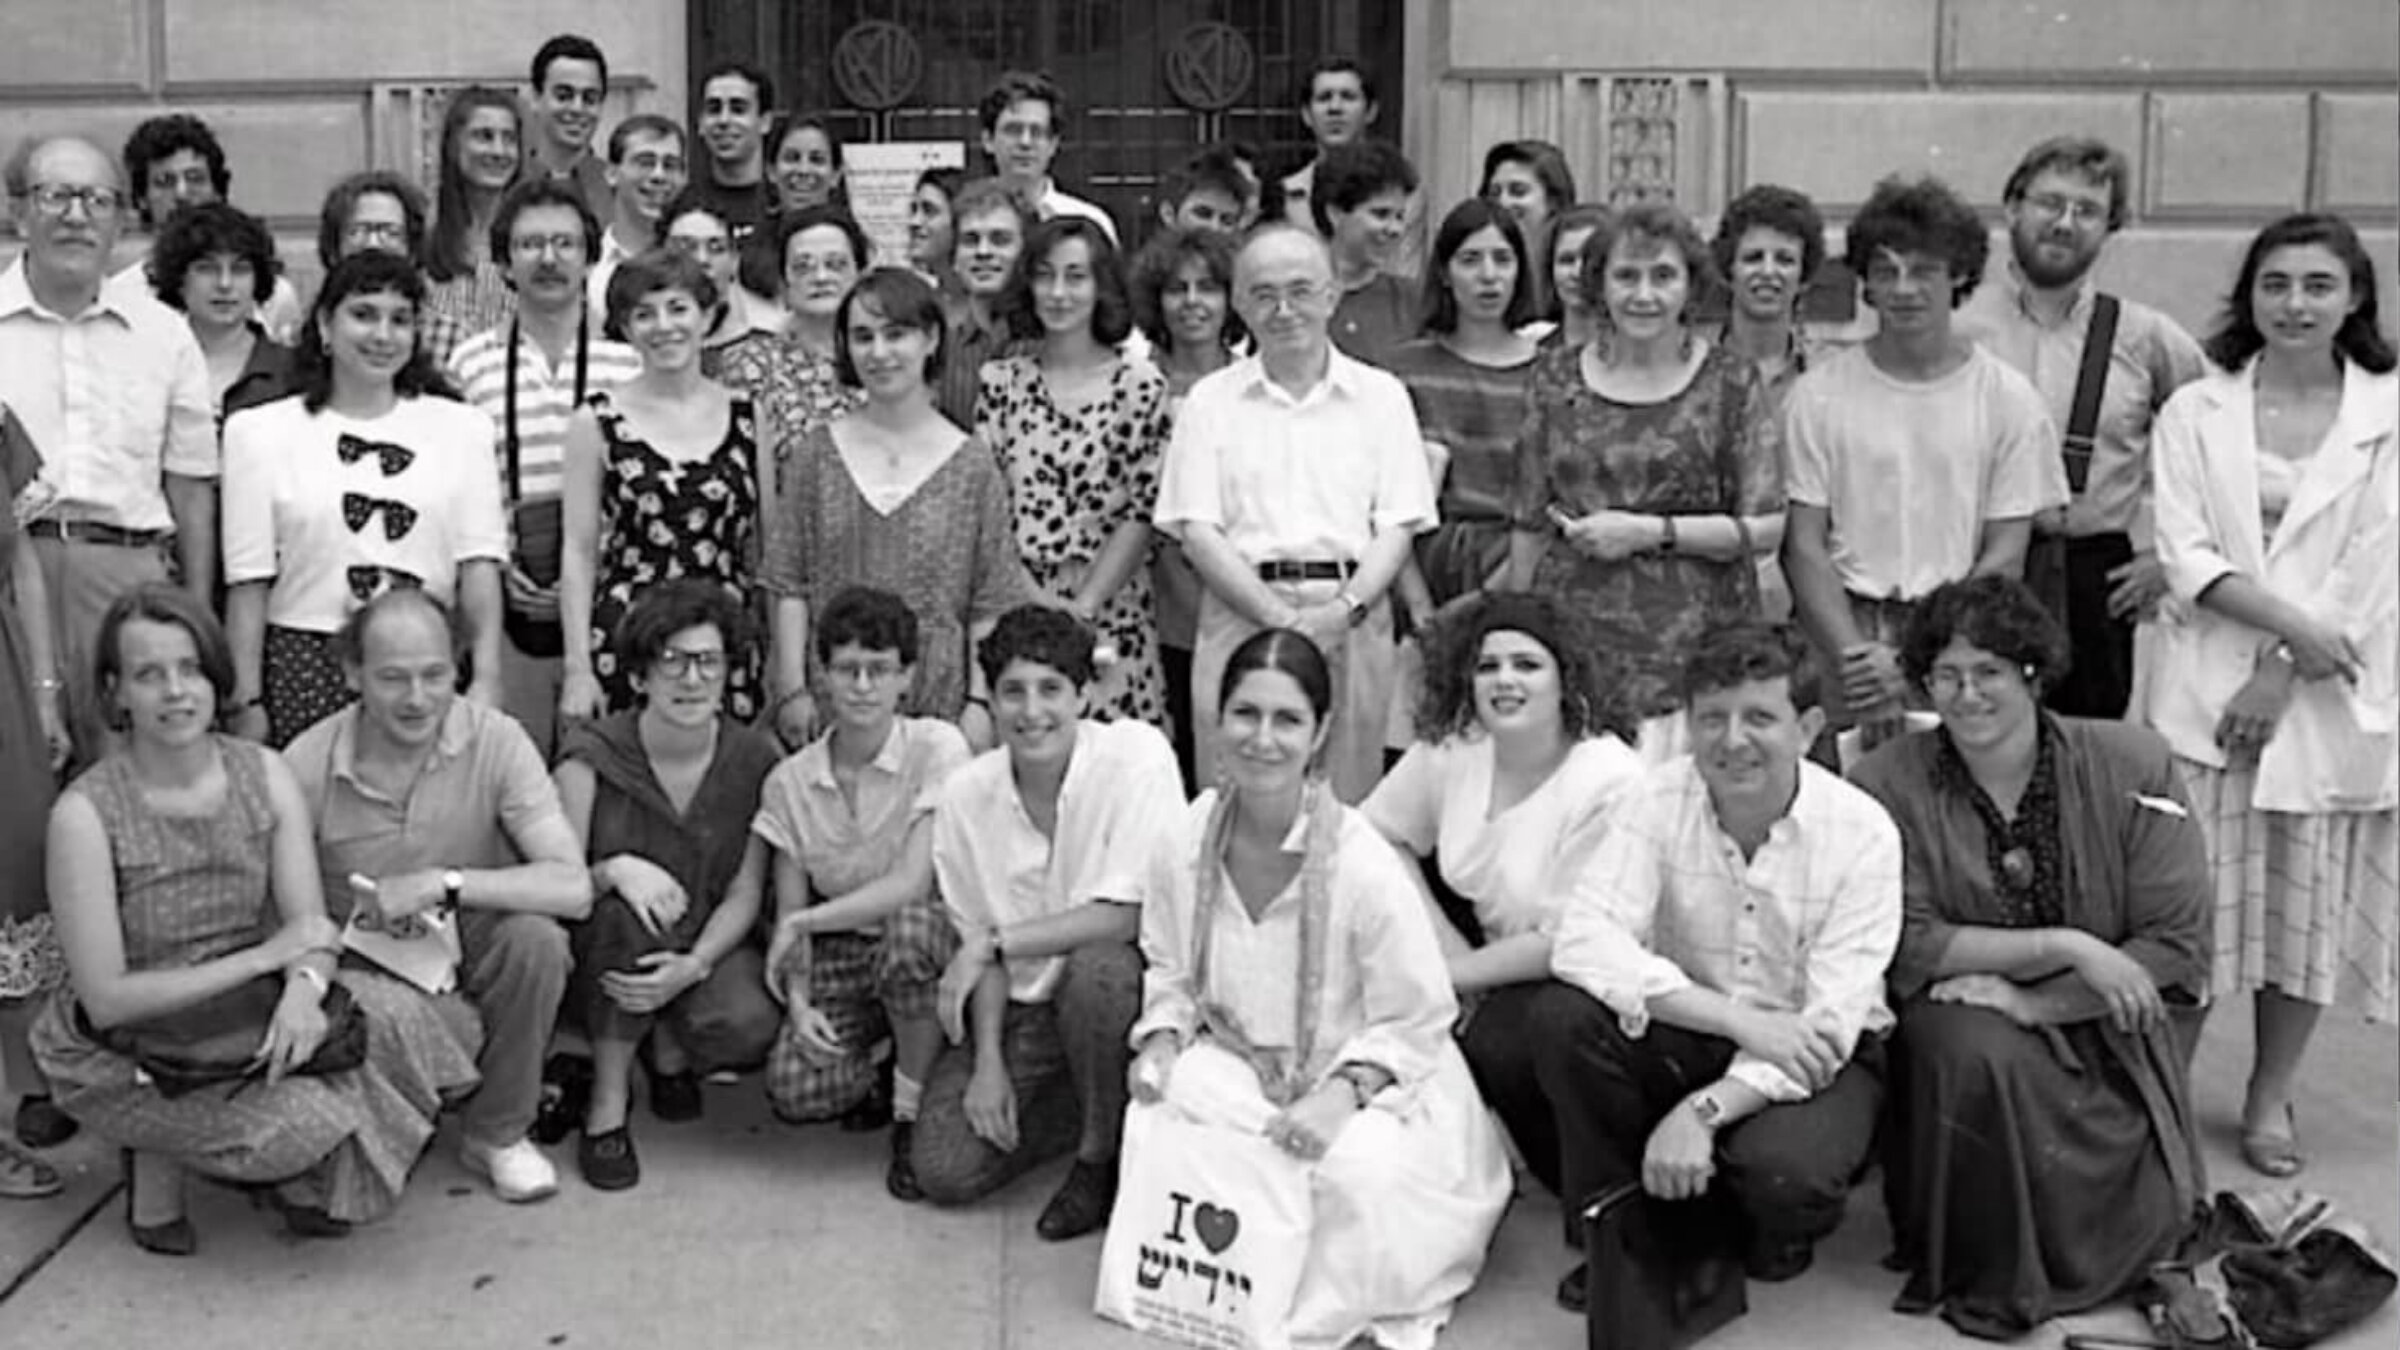 Students of the intensive YIVO Yiddish summer program was hosted by Columbia University during the 1960s and 70s. Mordkhe Schaechter is in the center, wearing a white shirt.